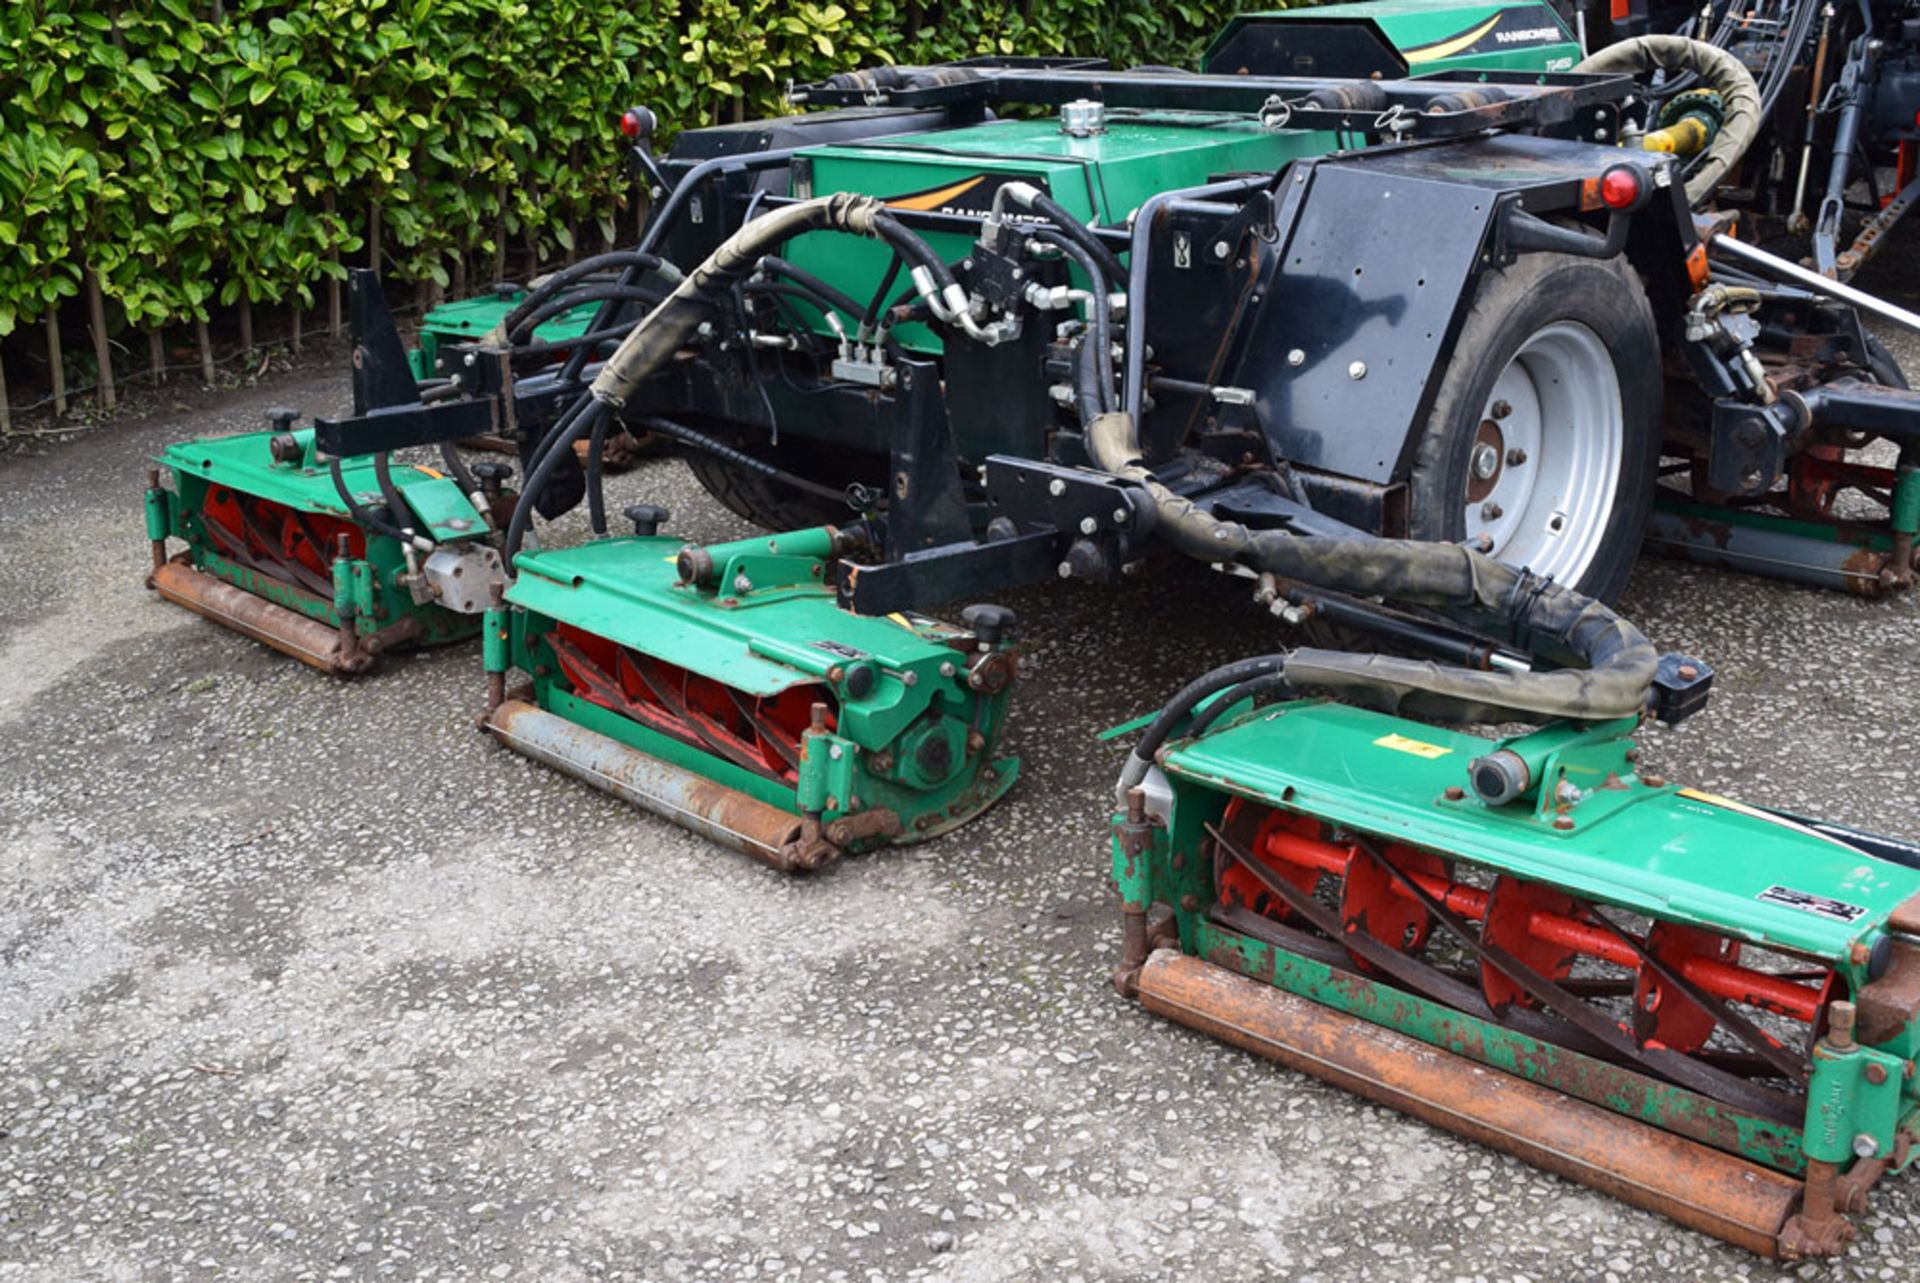 2009 Ransomes TG4650 Tractor Mount Trailed Cylinder Gang Mower - Image 11 of 13